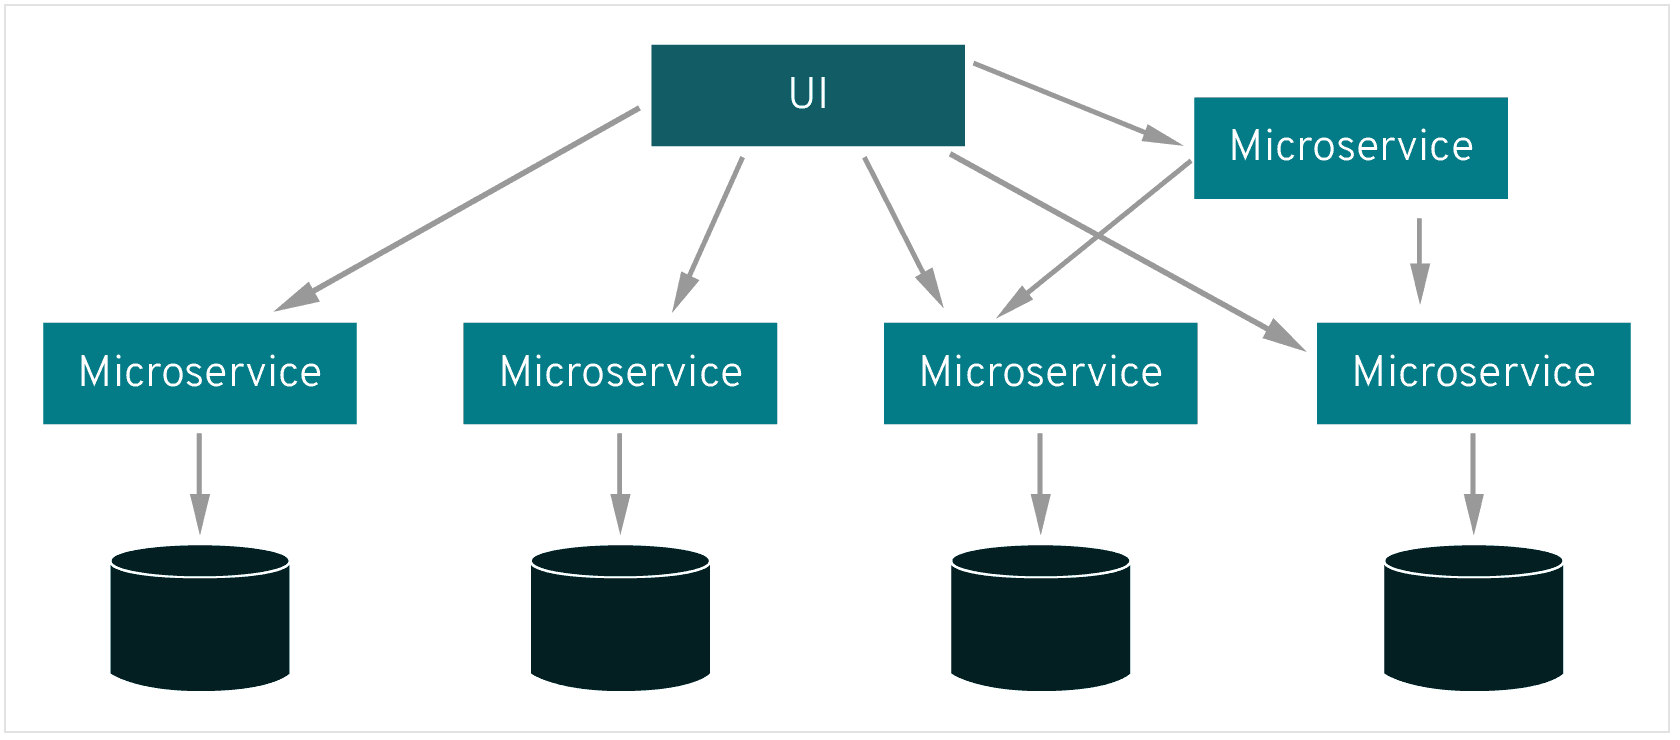 /images/blog/istio/01-istio-service-mesh/01-microservice.png